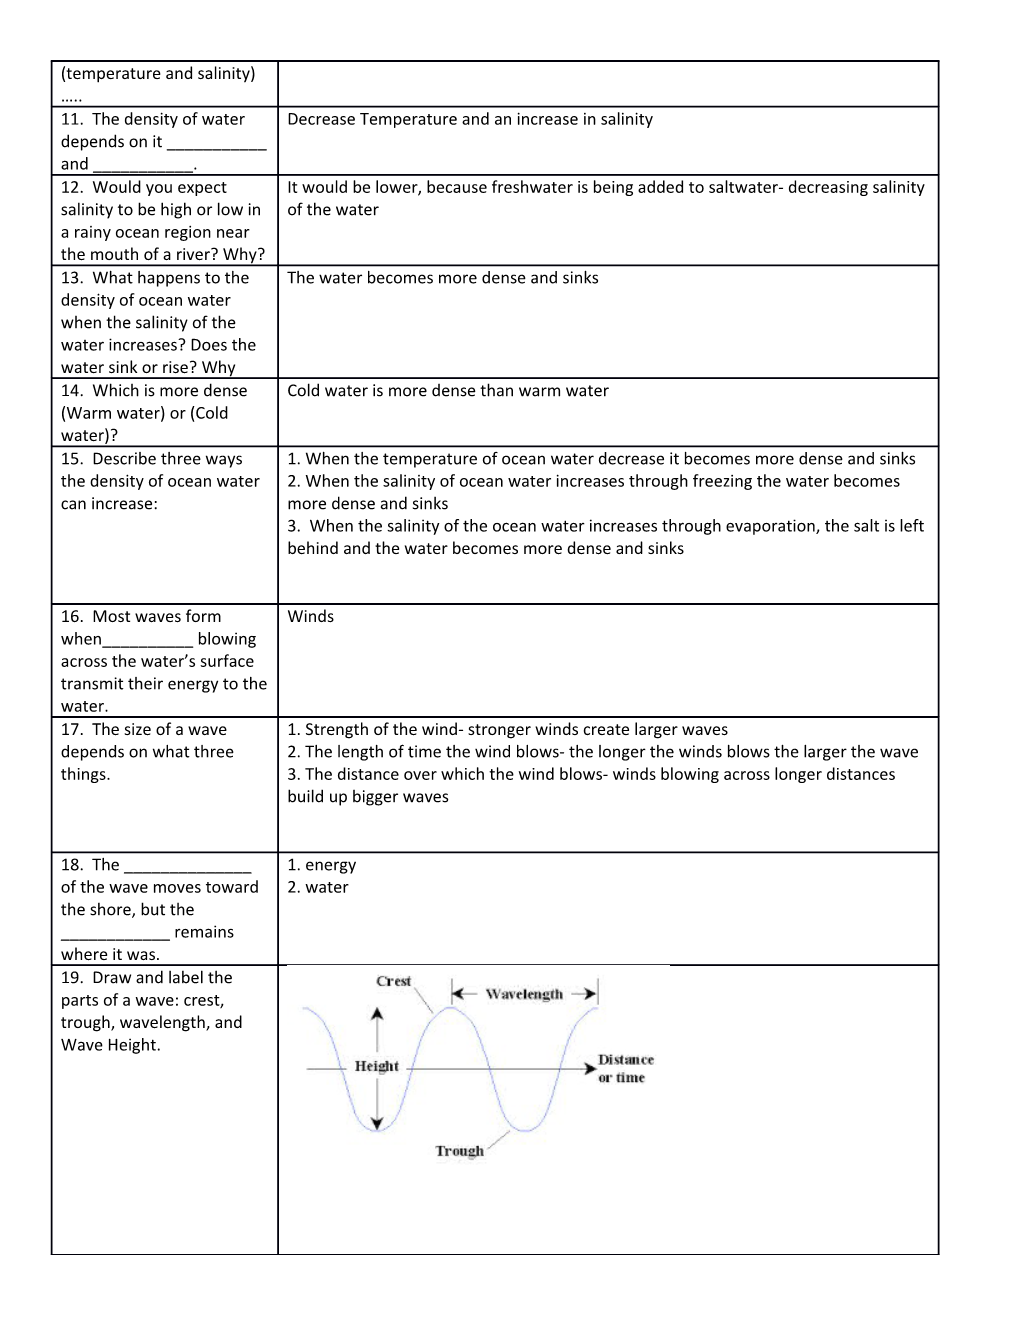 Standard S6E3 D. Explain the Causes of Currents, Waves, and Tide (Study Guide)